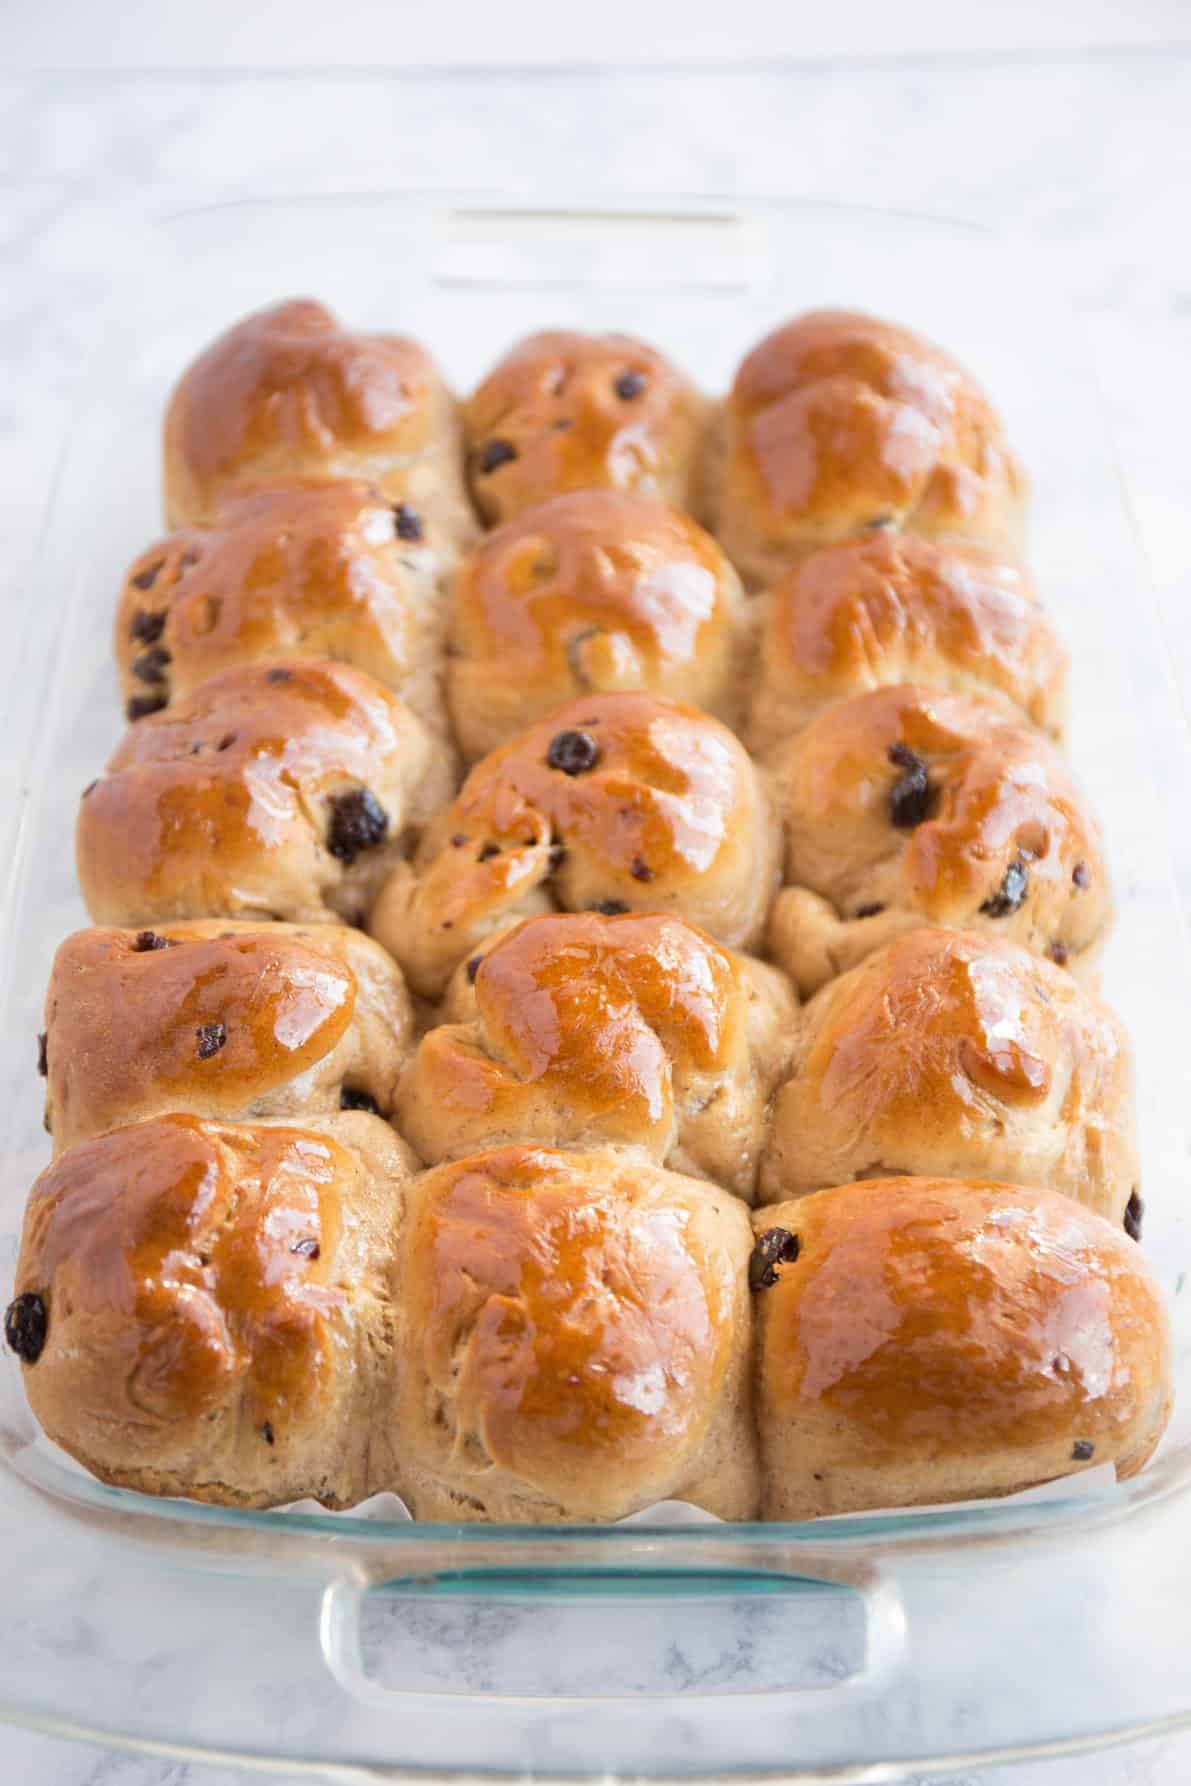 Hot Cross Buns that are not iced.